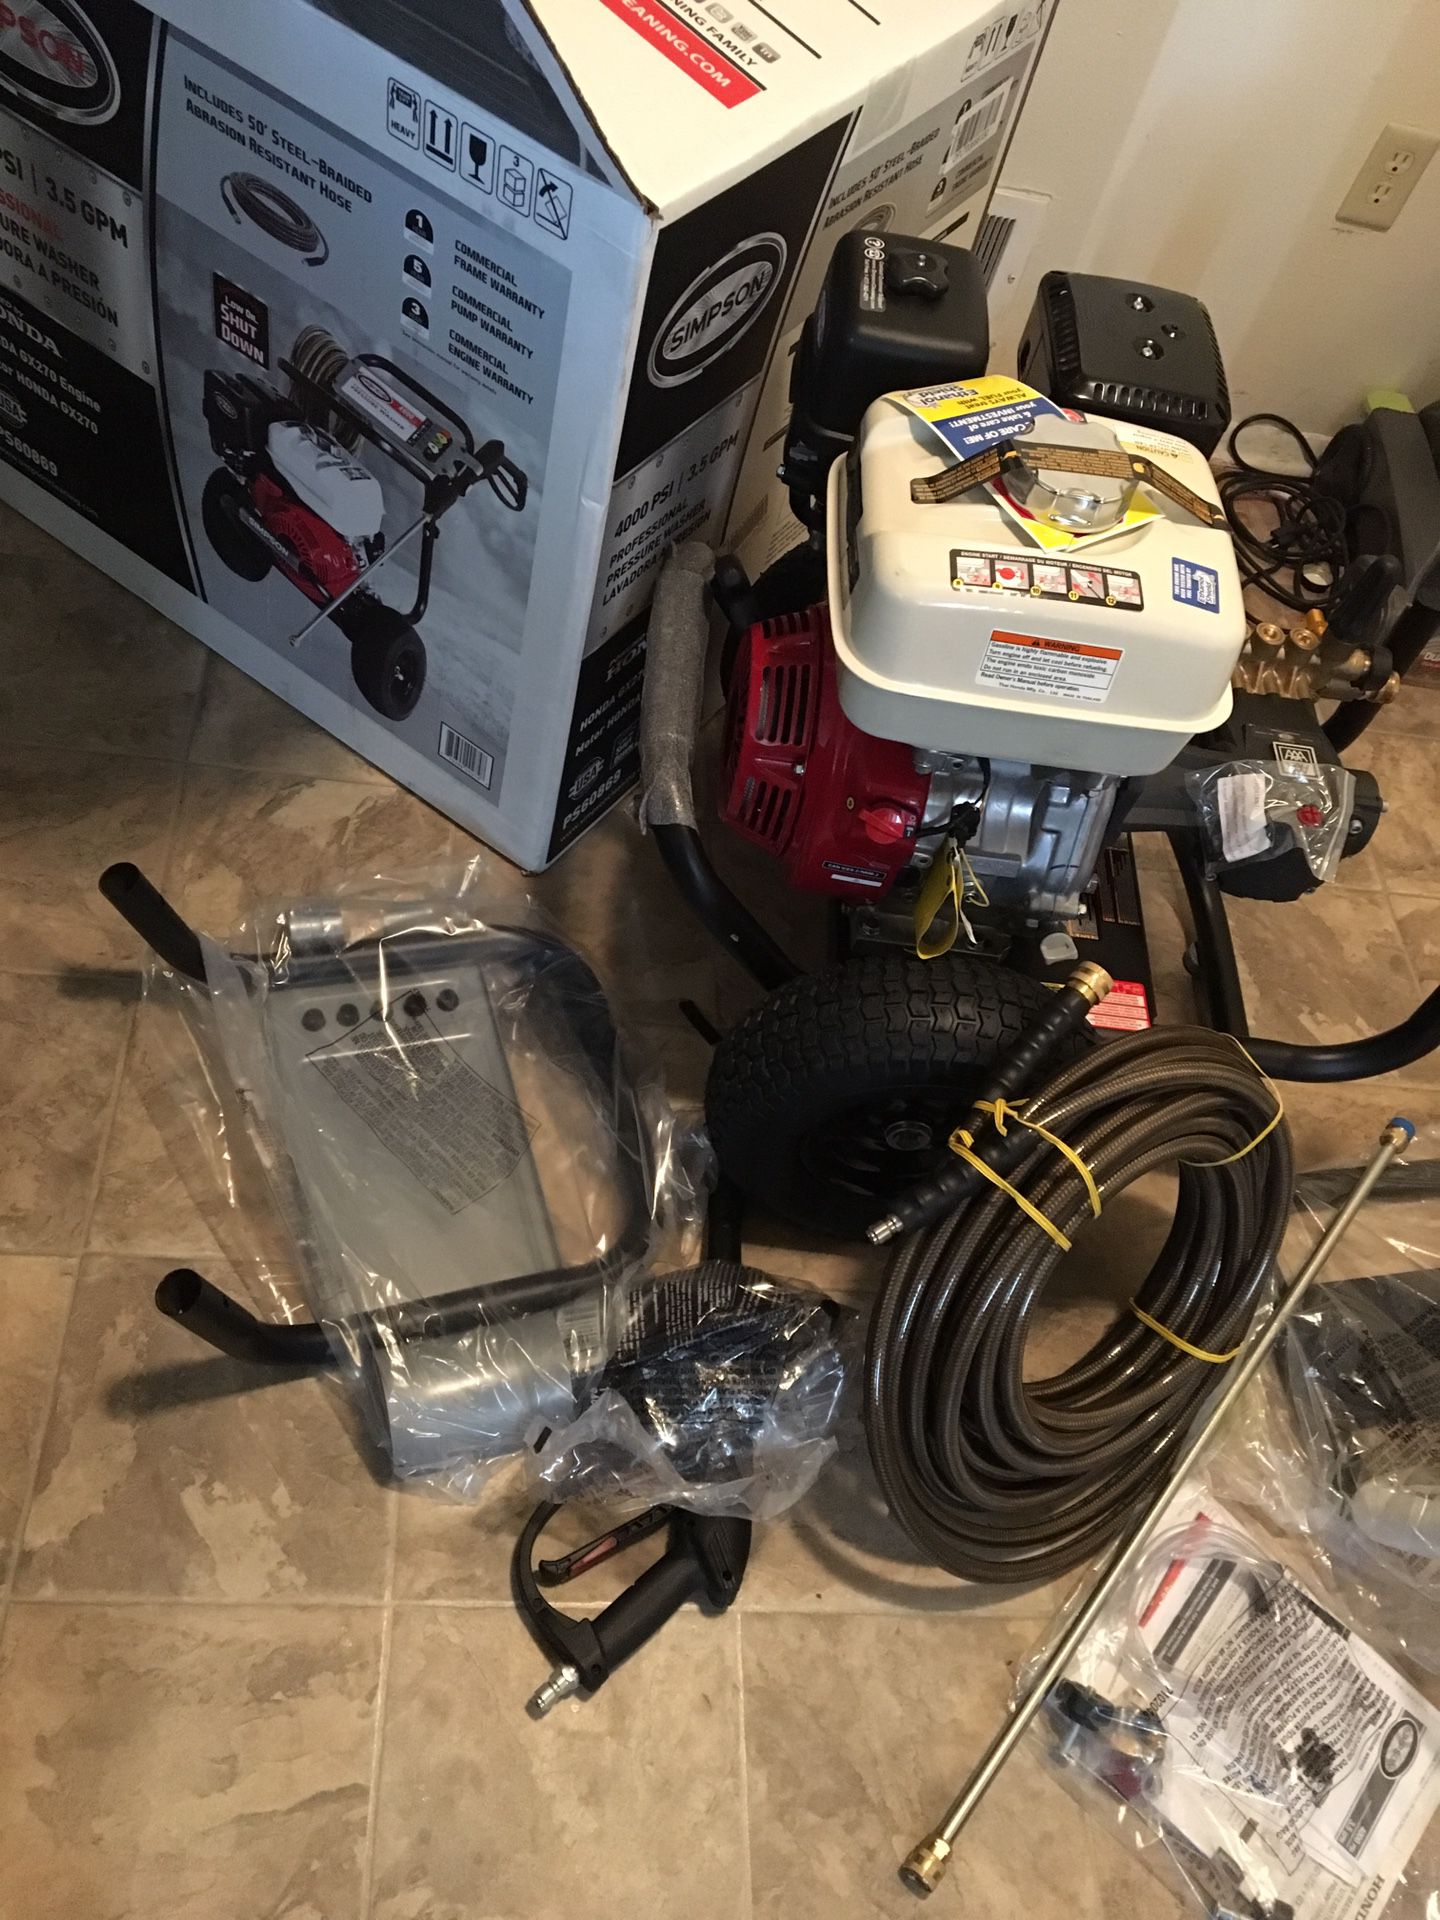 Simpson PS60869 4000 PSI @ 3.5 GPM Cold Water Gas Pressure Washer Powered by Honda